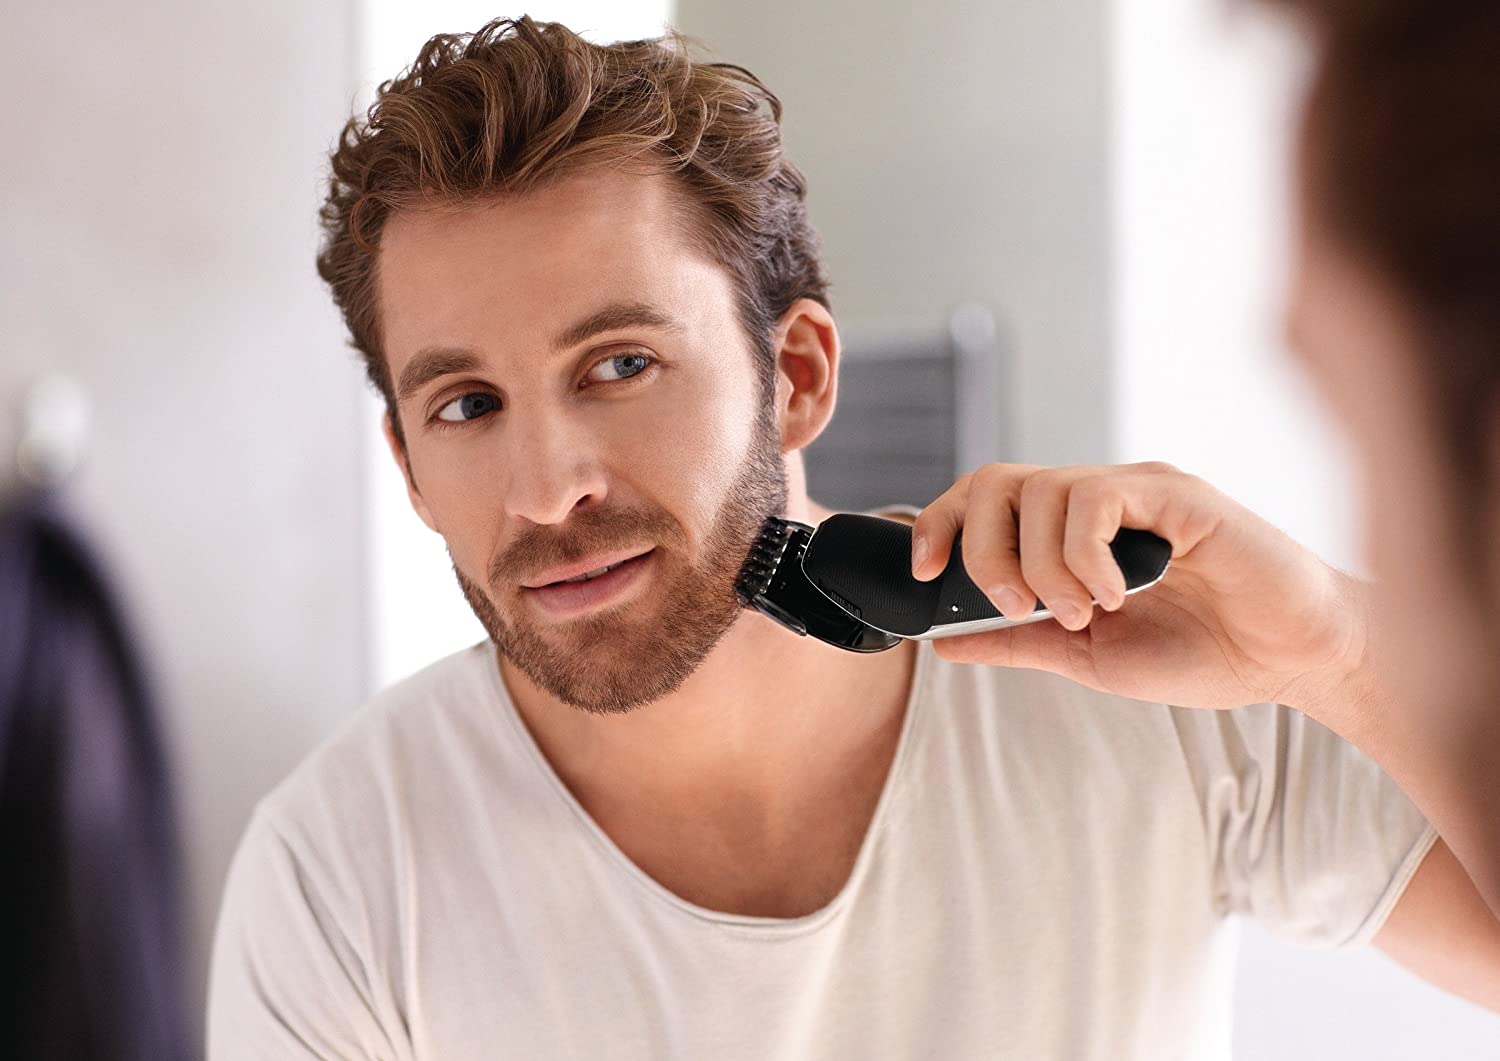 Philips RQ111/50 Click-On Styler - Trimming with styling and shaving - Upgrate for all Philips SensoTouch and Arcitec shavers